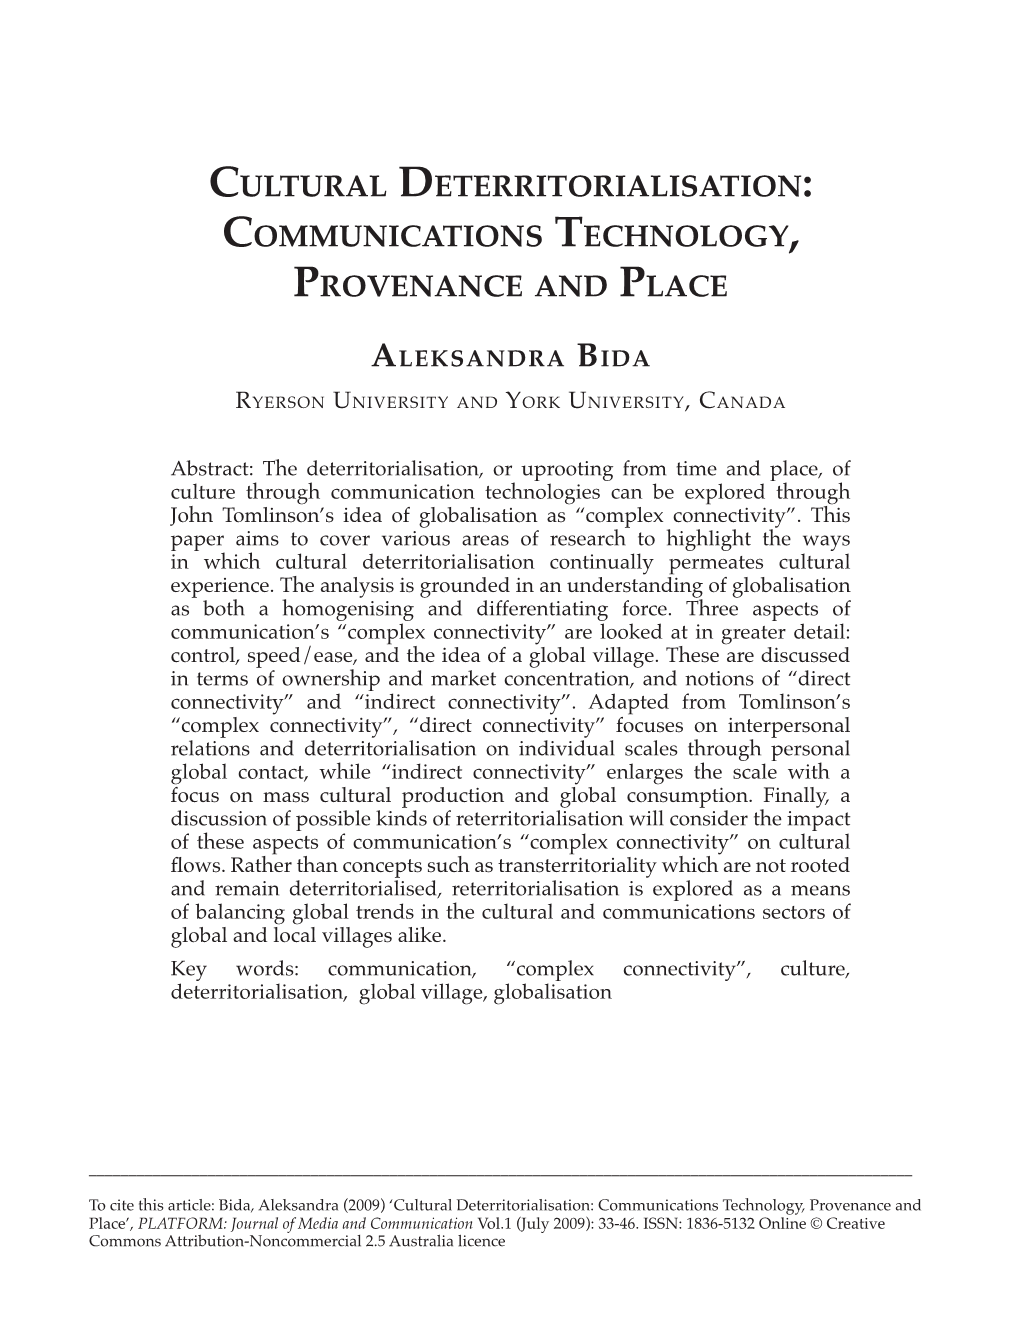 Cultural Deterritorialisation Continually Permeates Cultural Experience